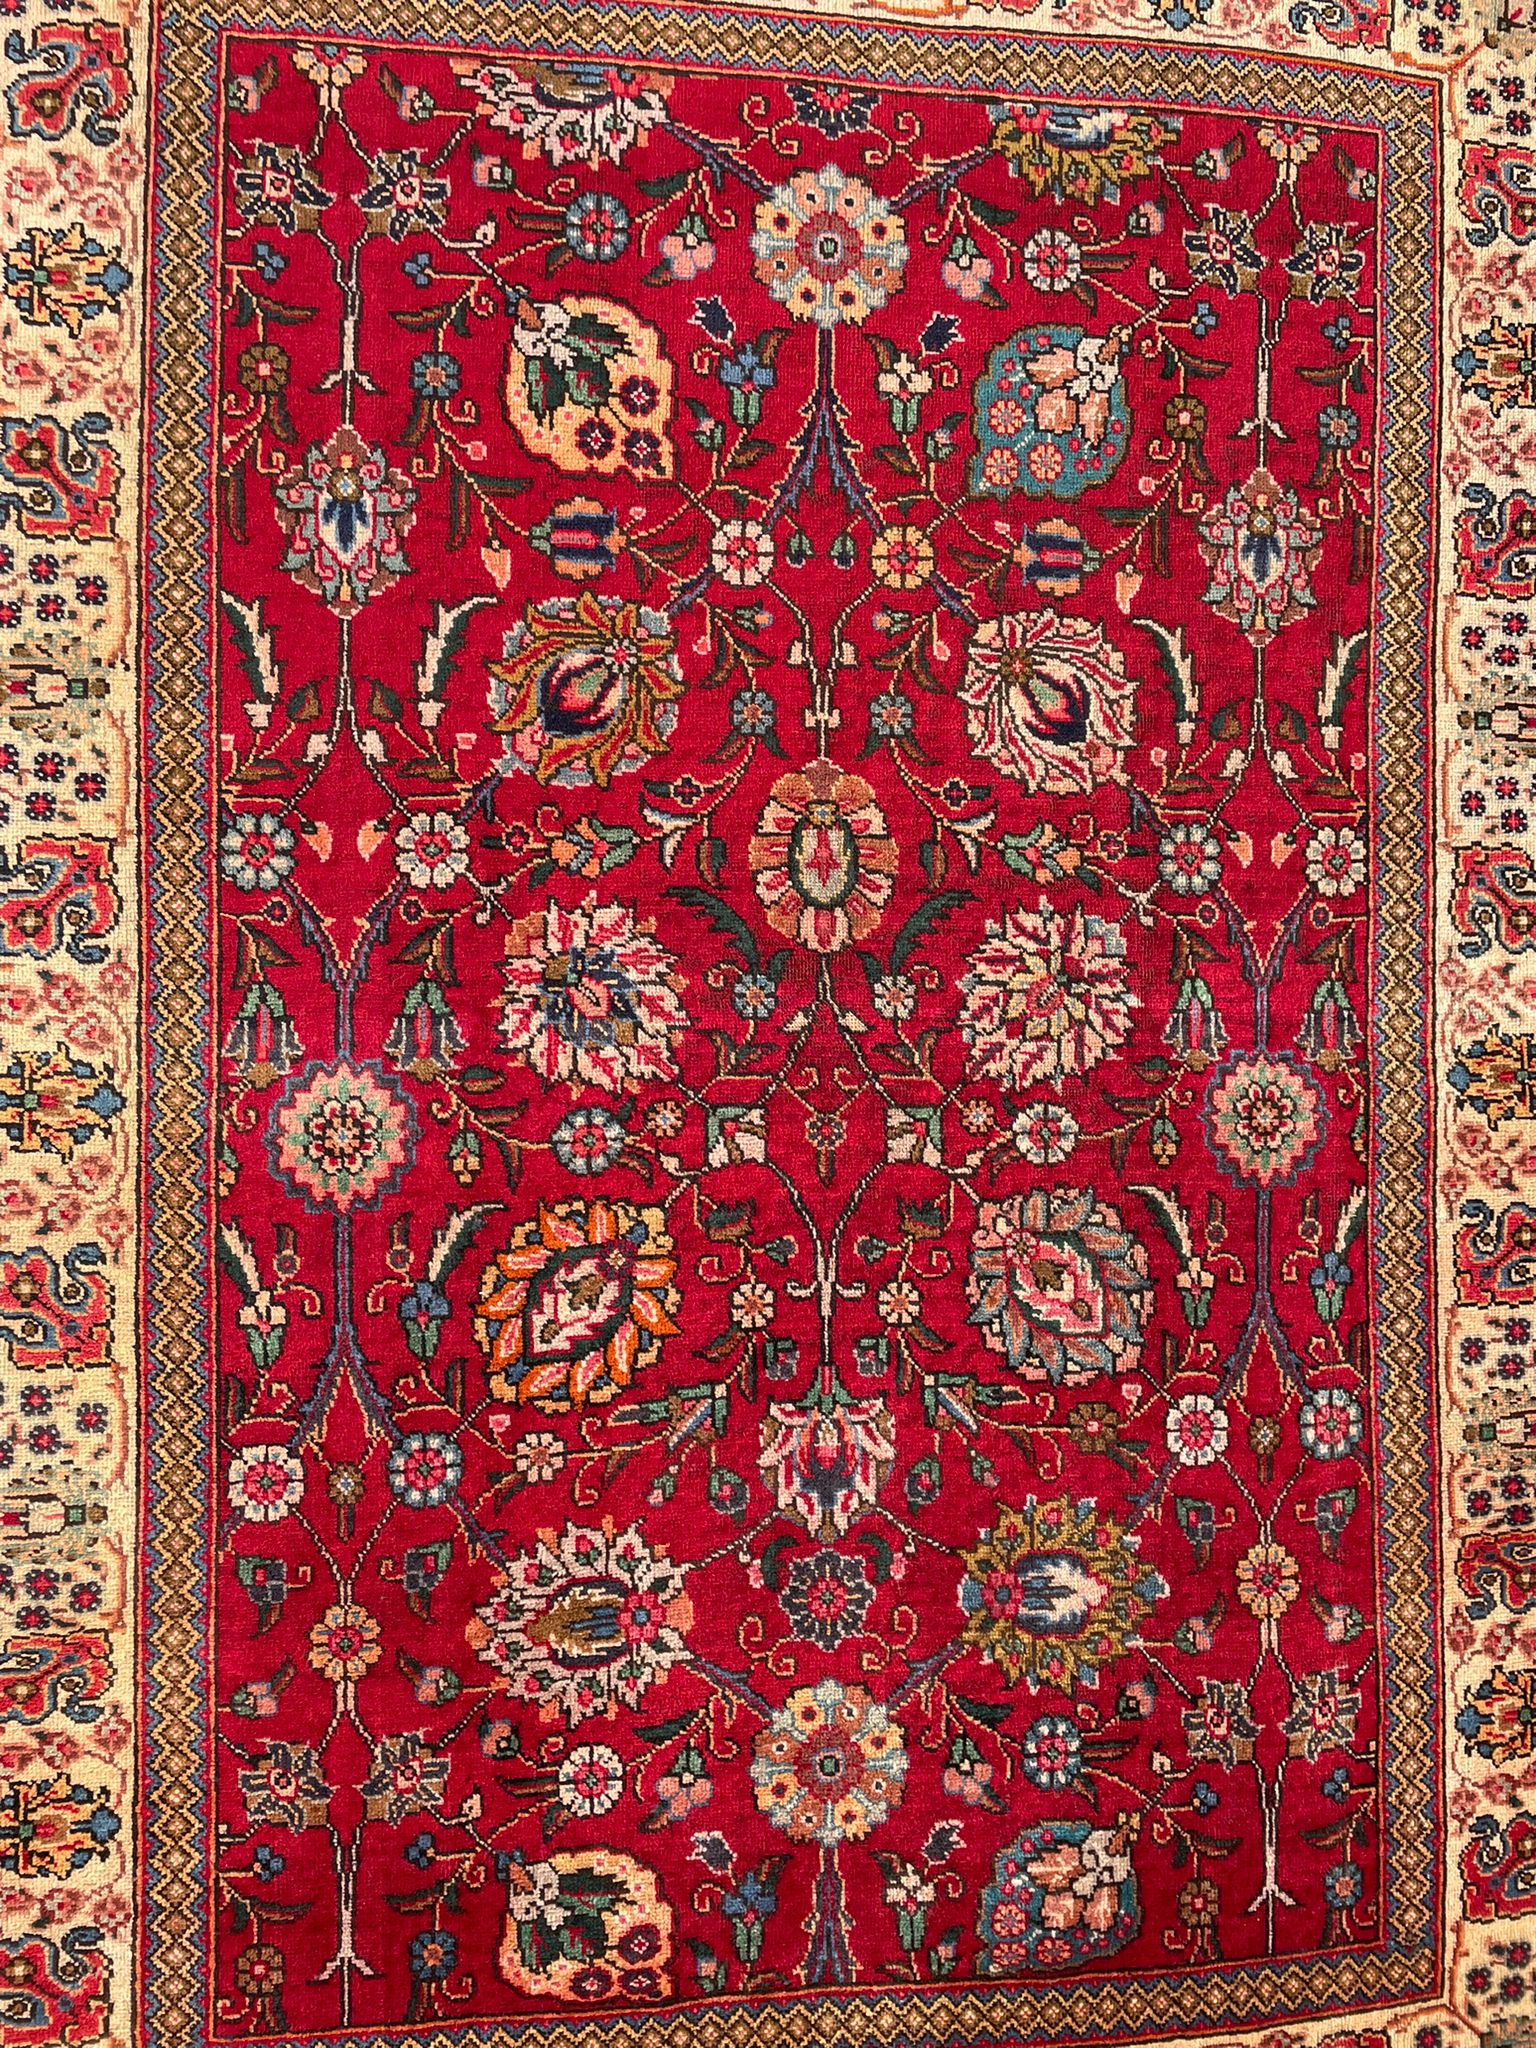 AN EARLY 20TH CENTURY HAND KNOTTED PERSIAN TABRIZ FLOOR RUG